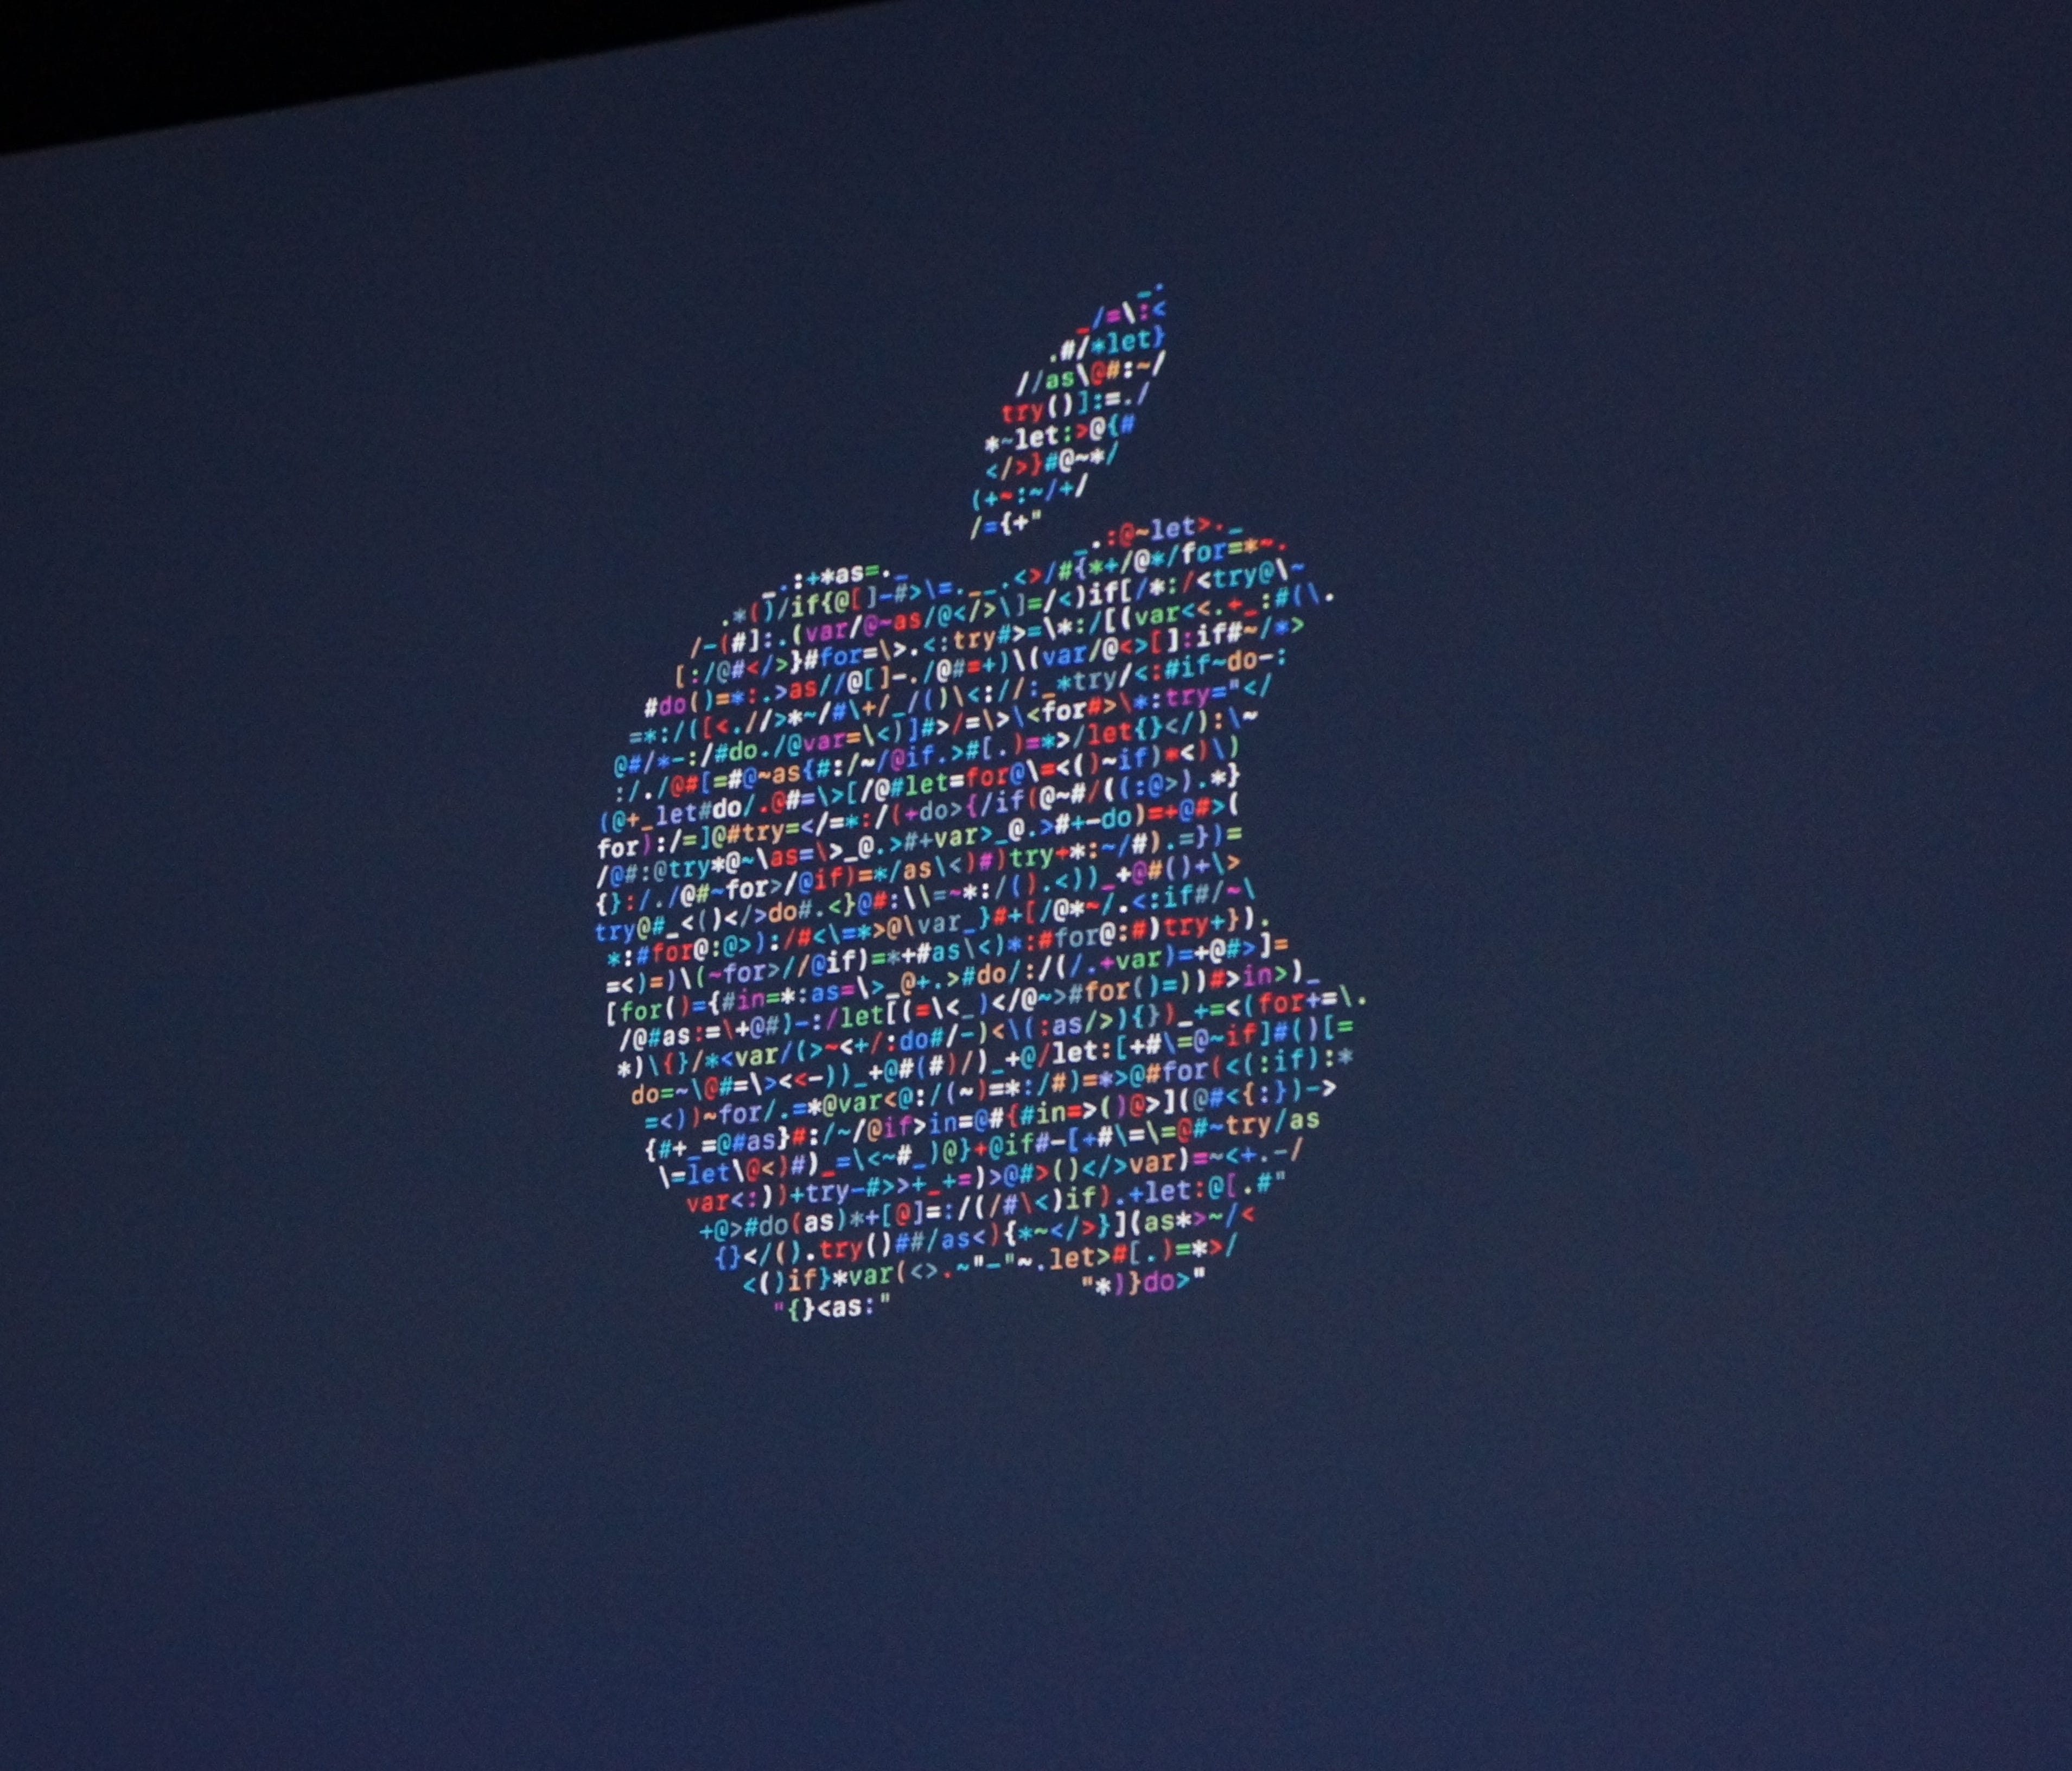 Apple's logo on screen at company's Worldwide Developer Conference in June 2016.